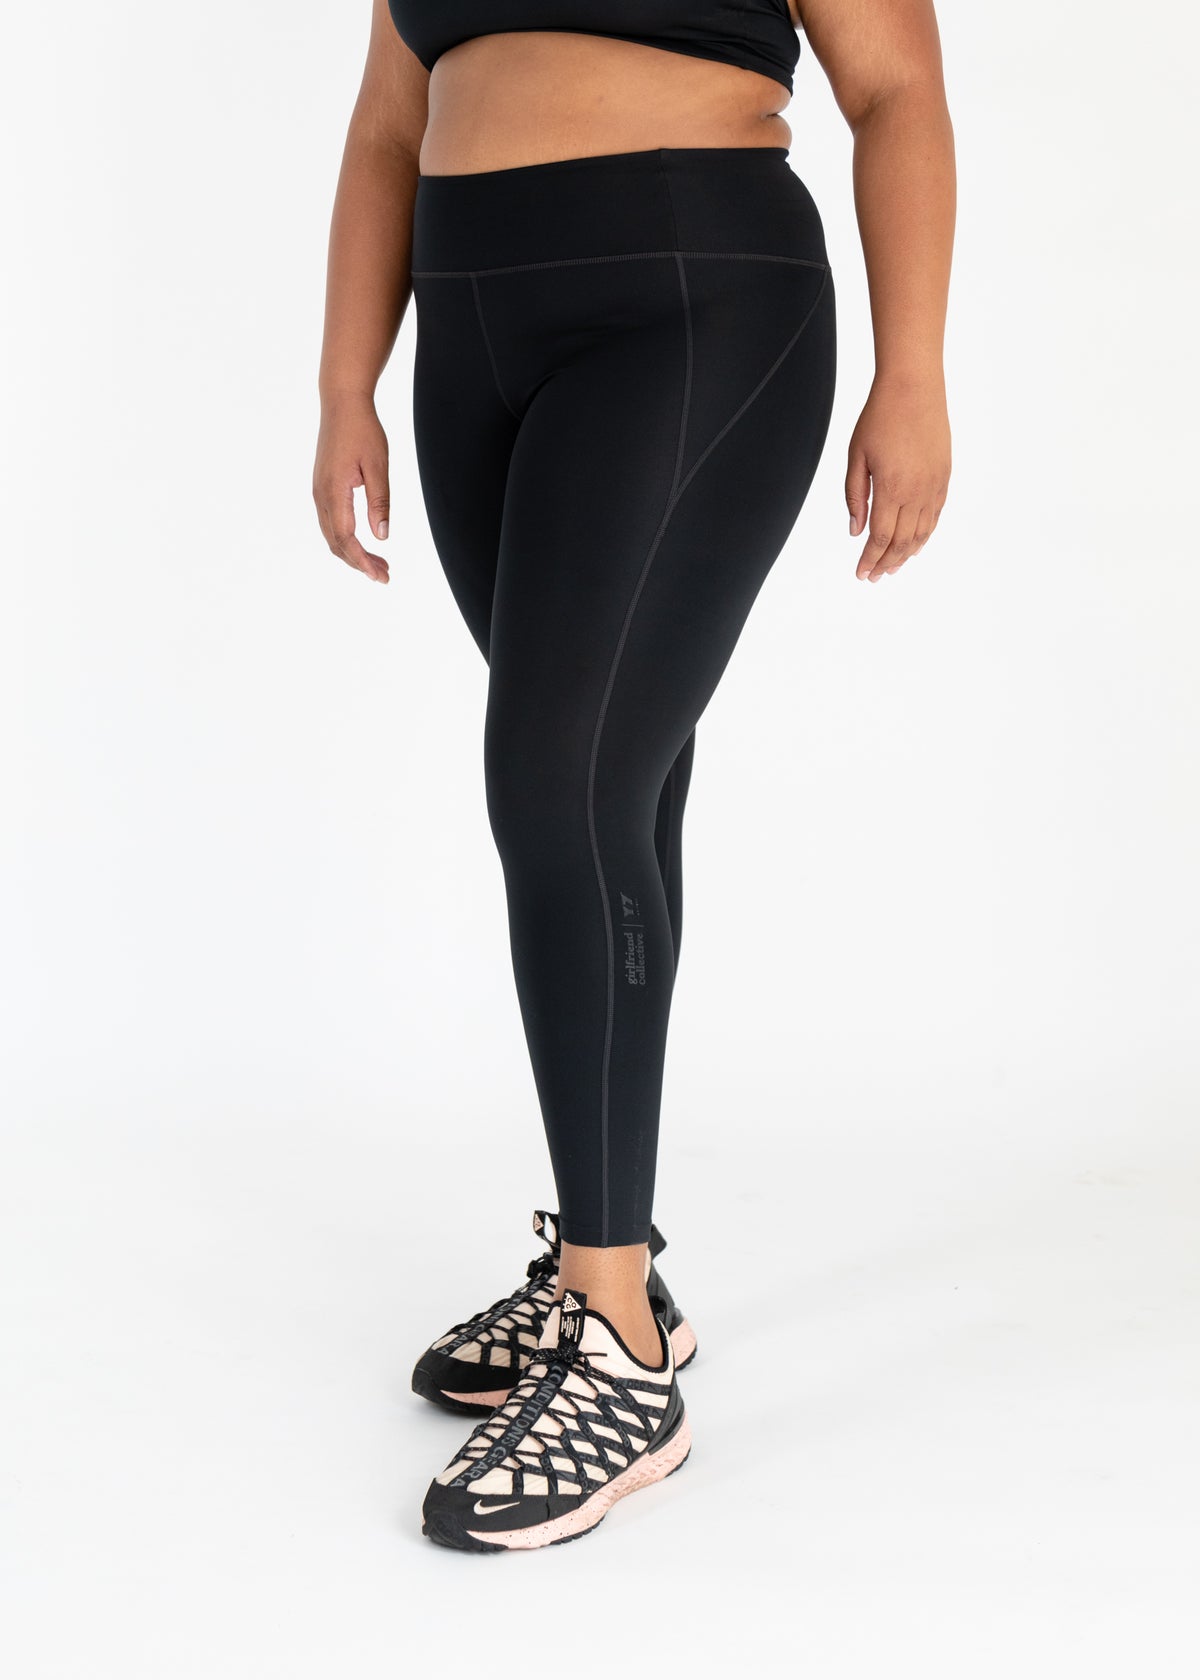 Lululemon Reflective Leggings Size 6 - $32 (58% Off Retail) - From Riley